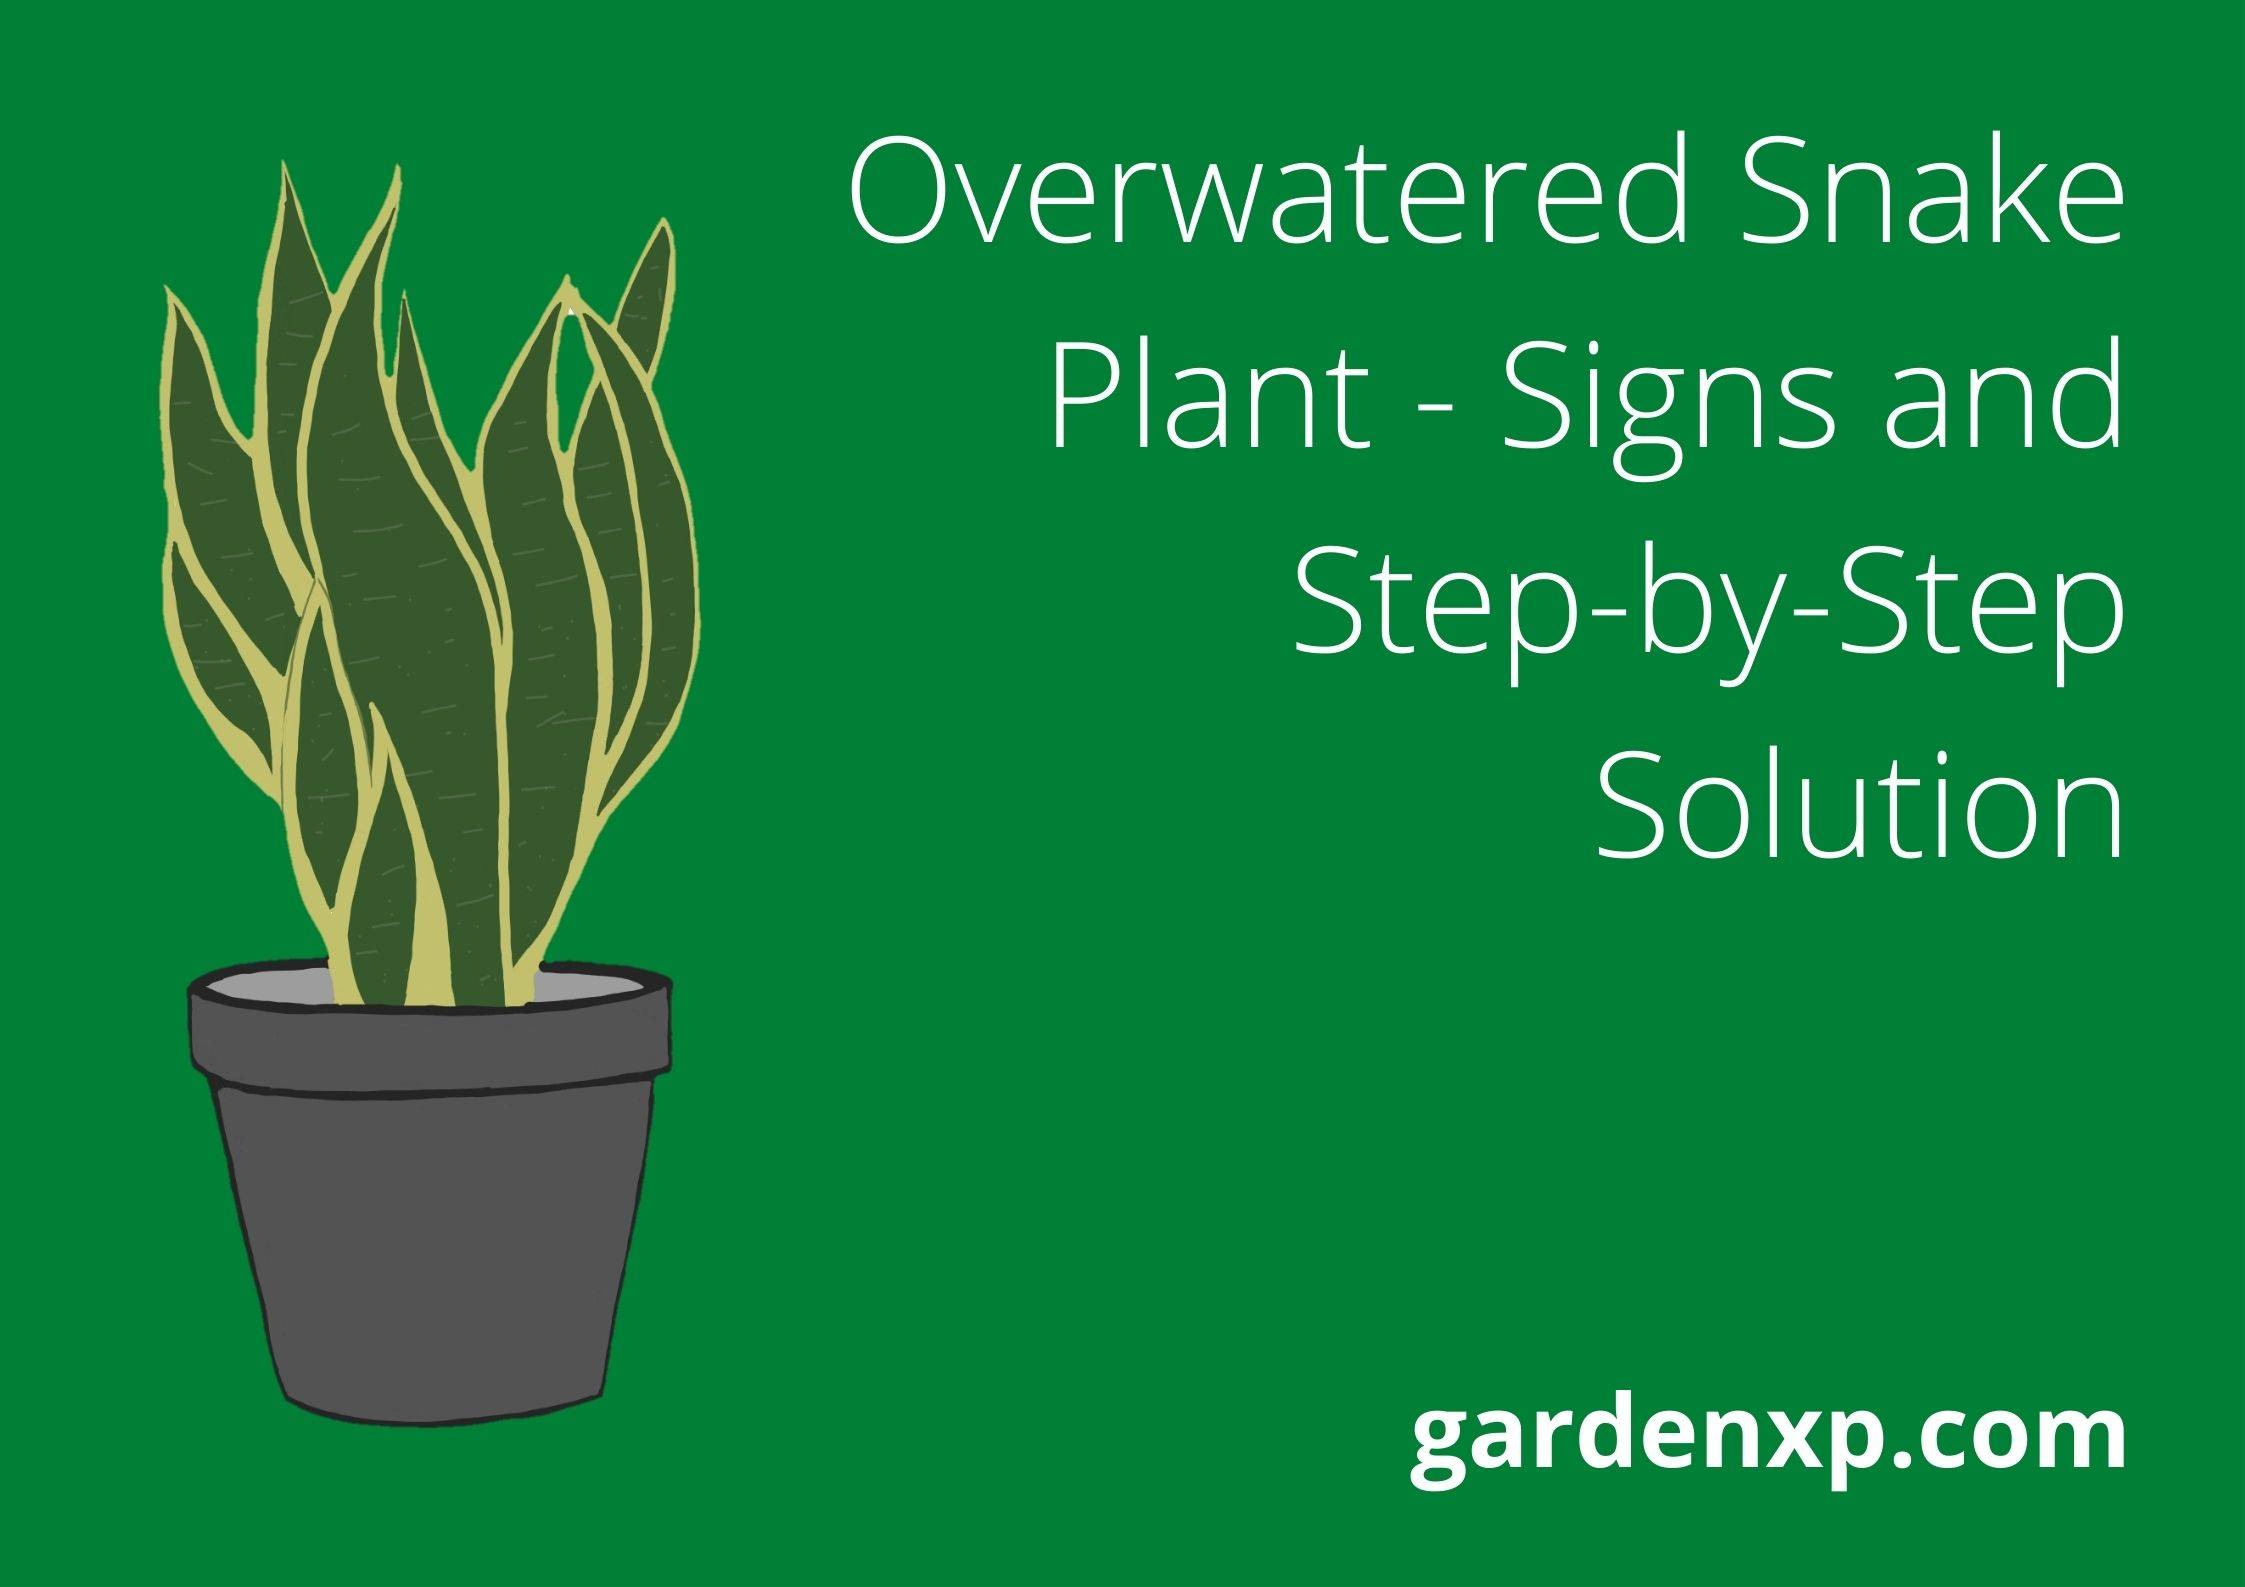 Overwatered Snake Plant - Signs and Step-by-Step Solution